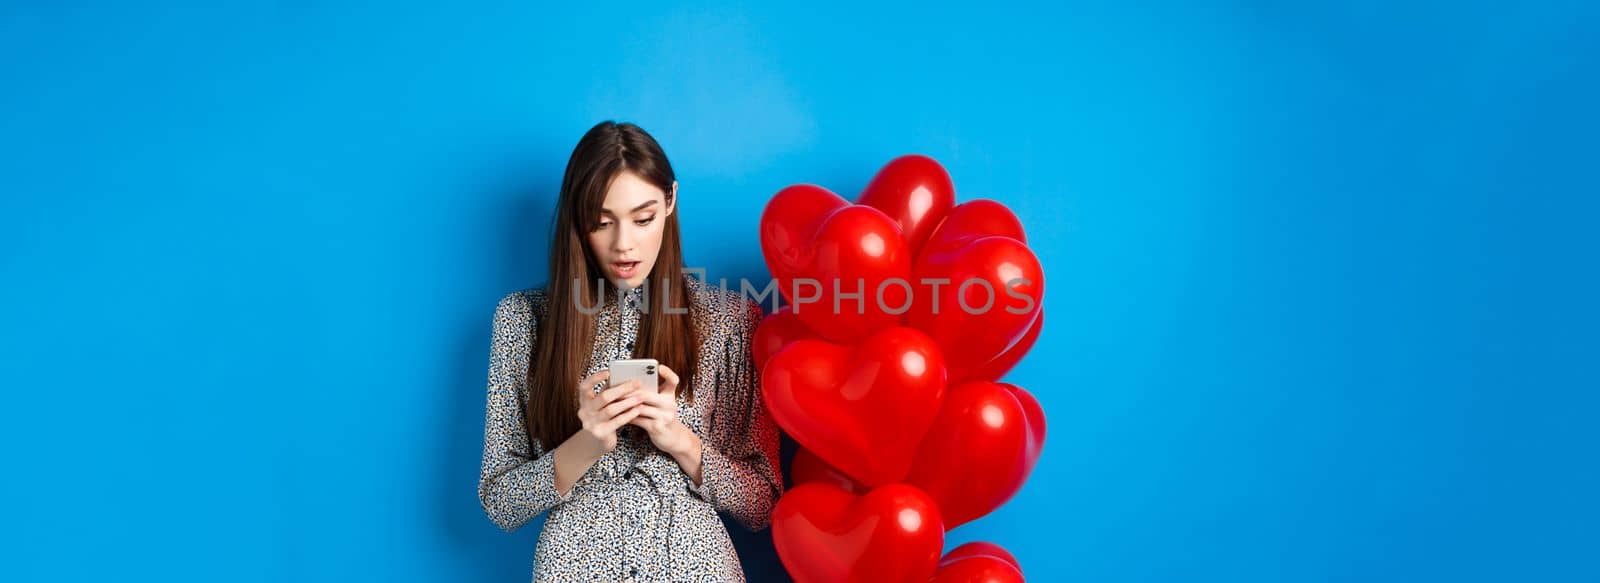 Valentines day. Portrait of young woman standing near red romantic balloons, looking surprised at smartphone screen, blue background.